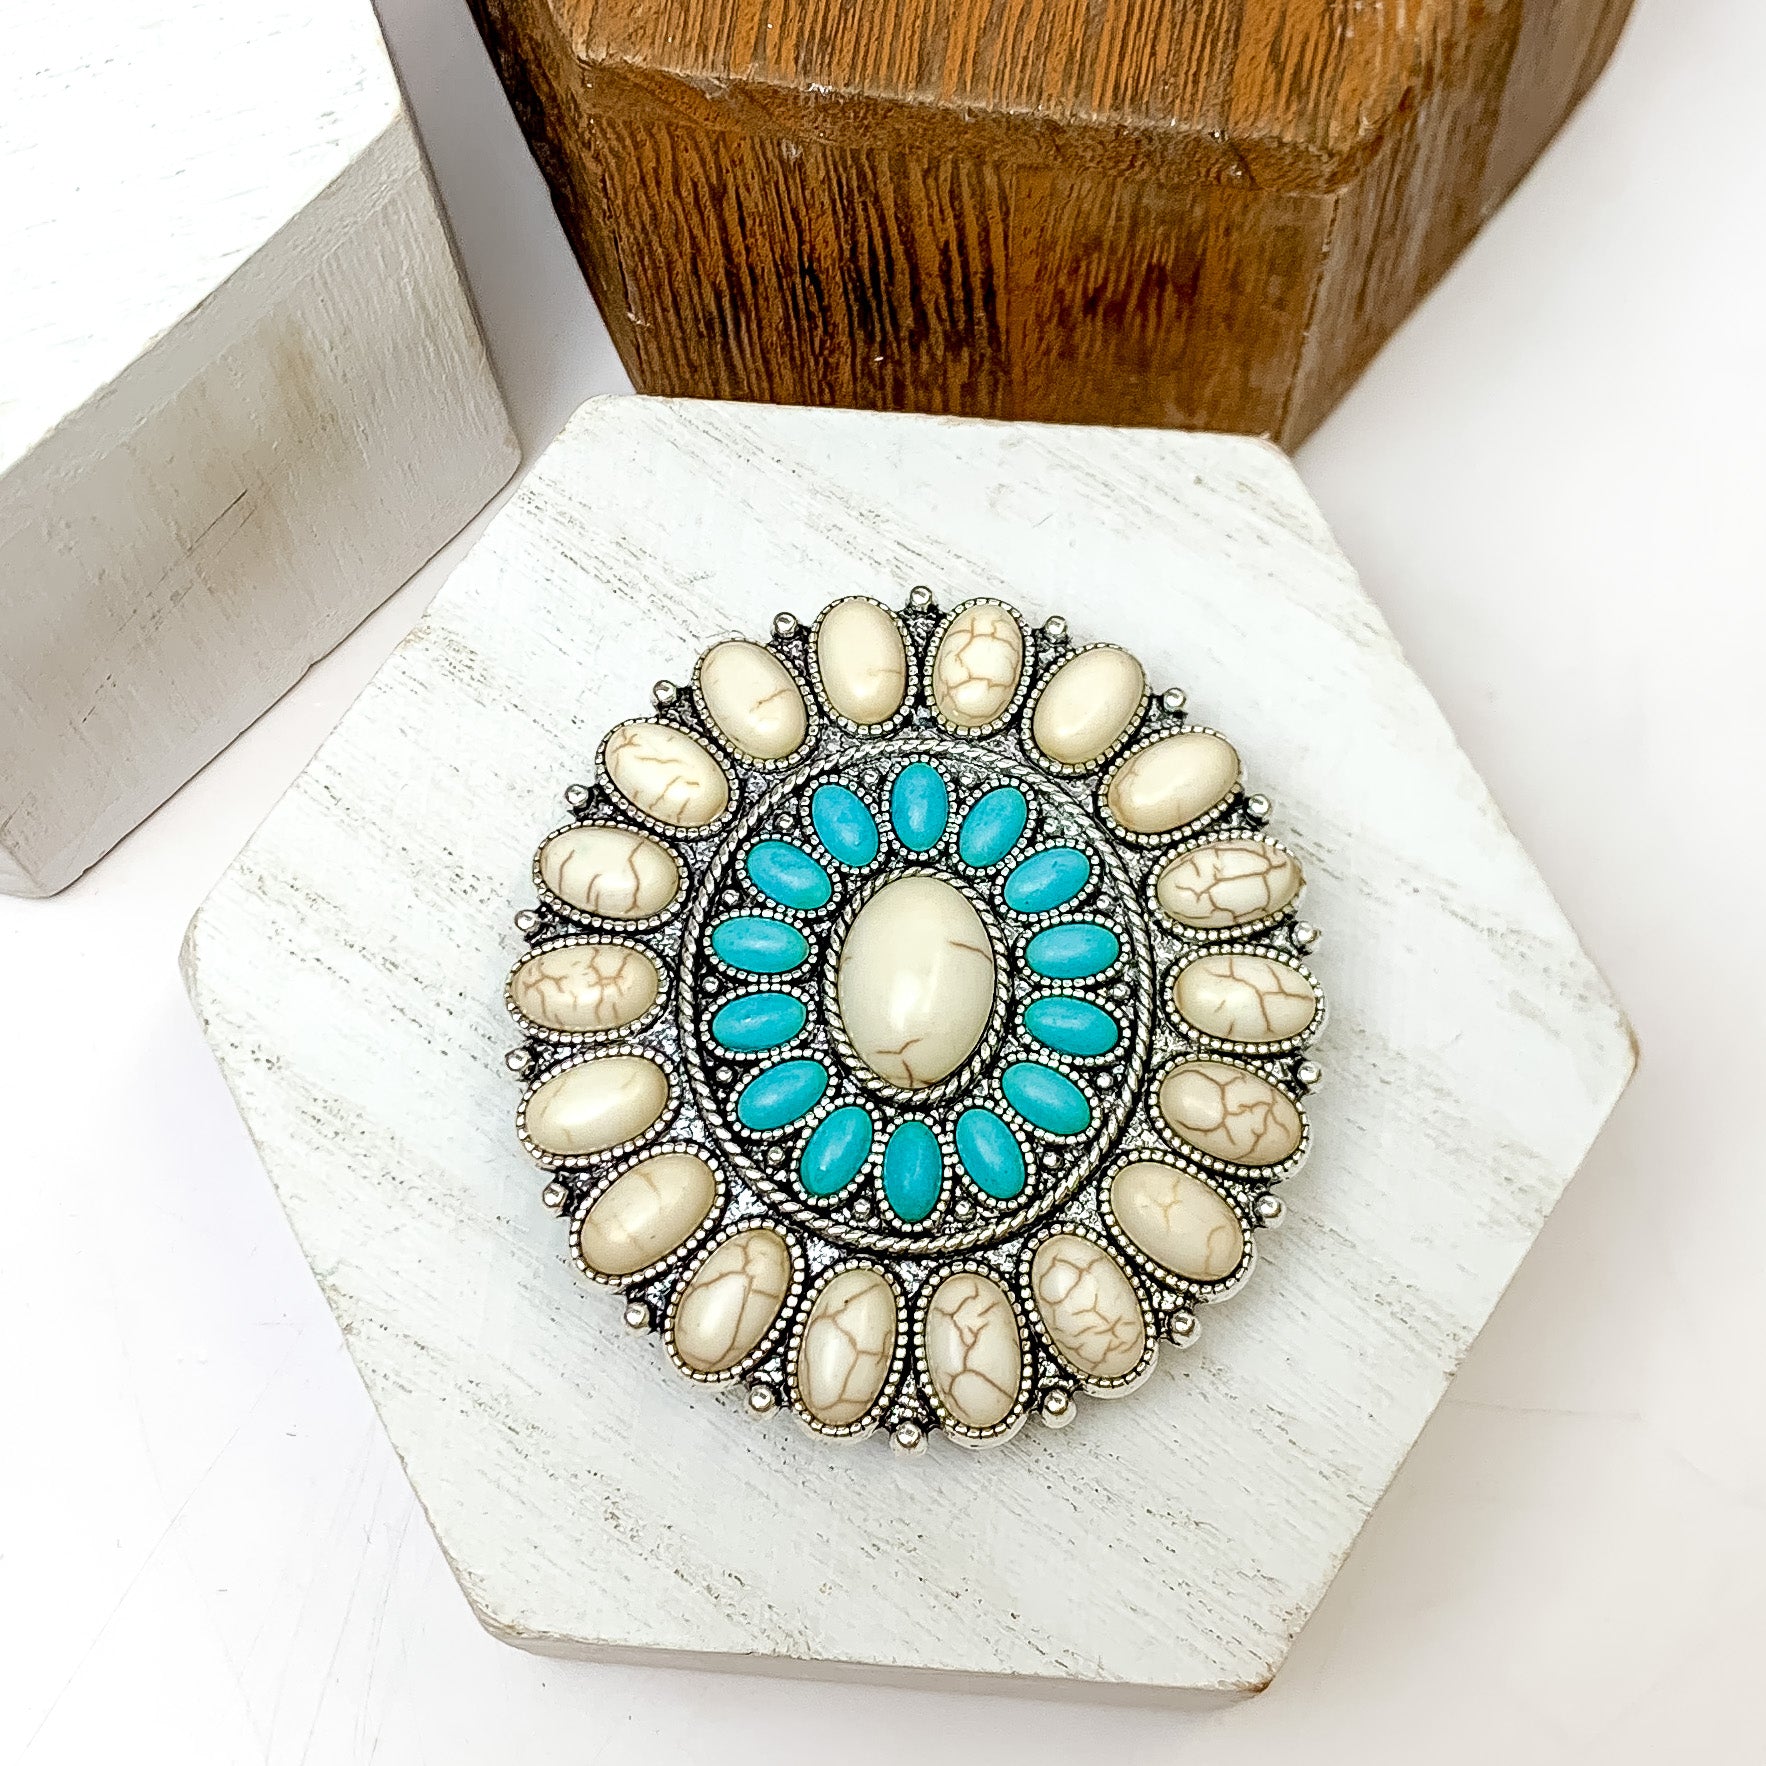 Silver Tone With Turquoise and Ivory Stone Circle Phone Grip. This phone grip is pictured on a white block with a white background behind it.